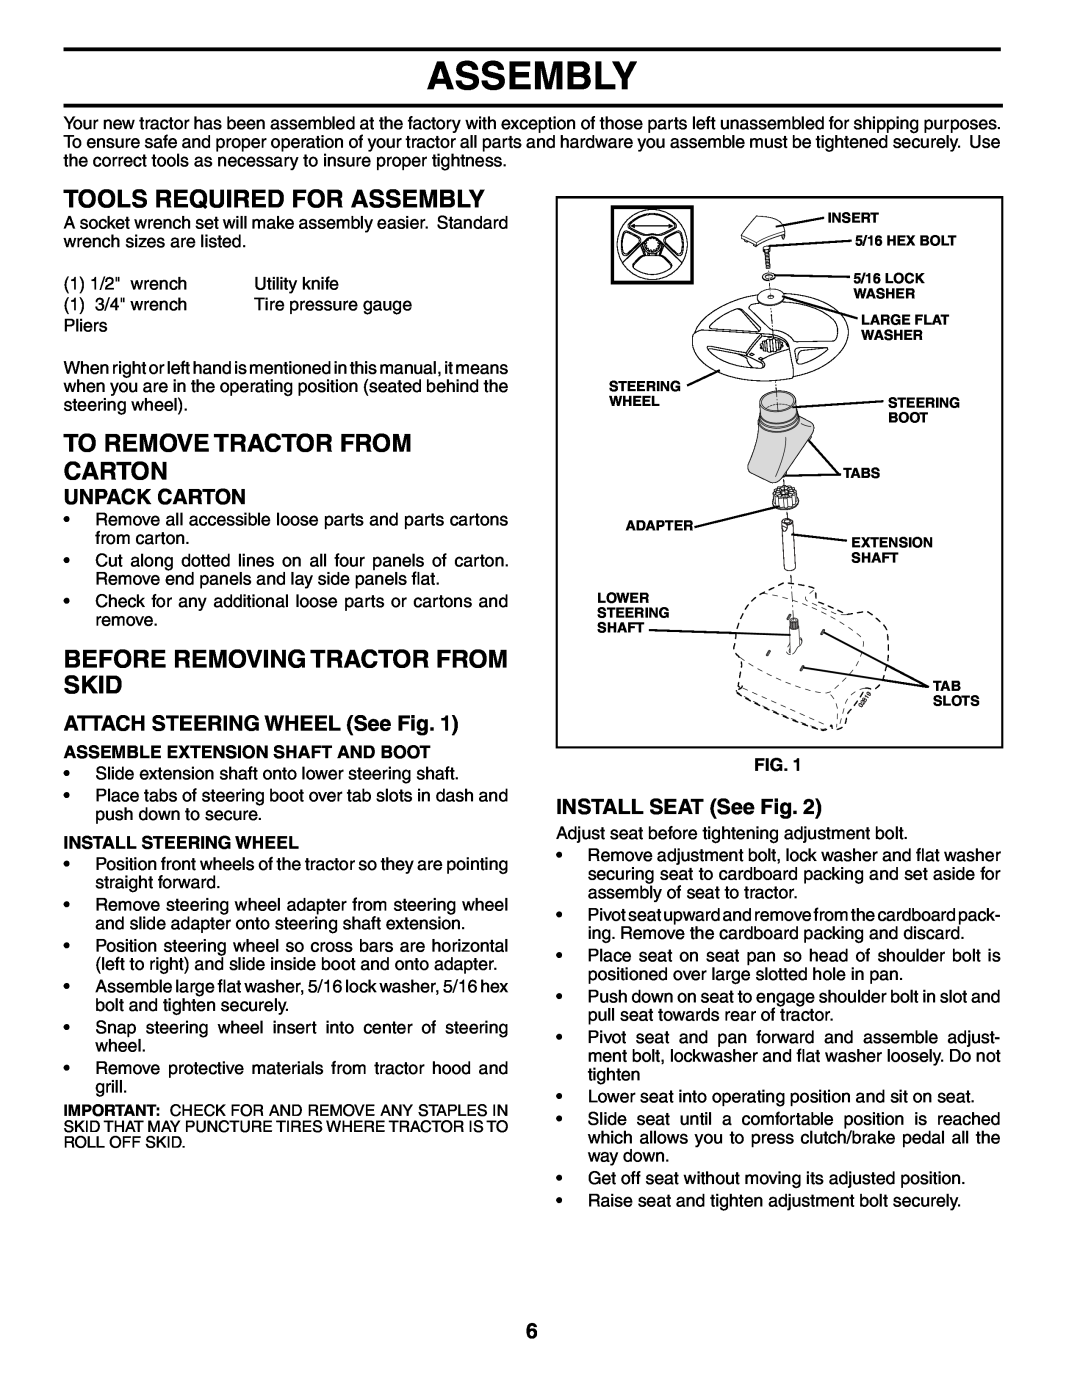 Weed Eater 403284 manual Tools Required For Assembly, To Remove Tractor From Carton, Before Removing Tractor From Skid 